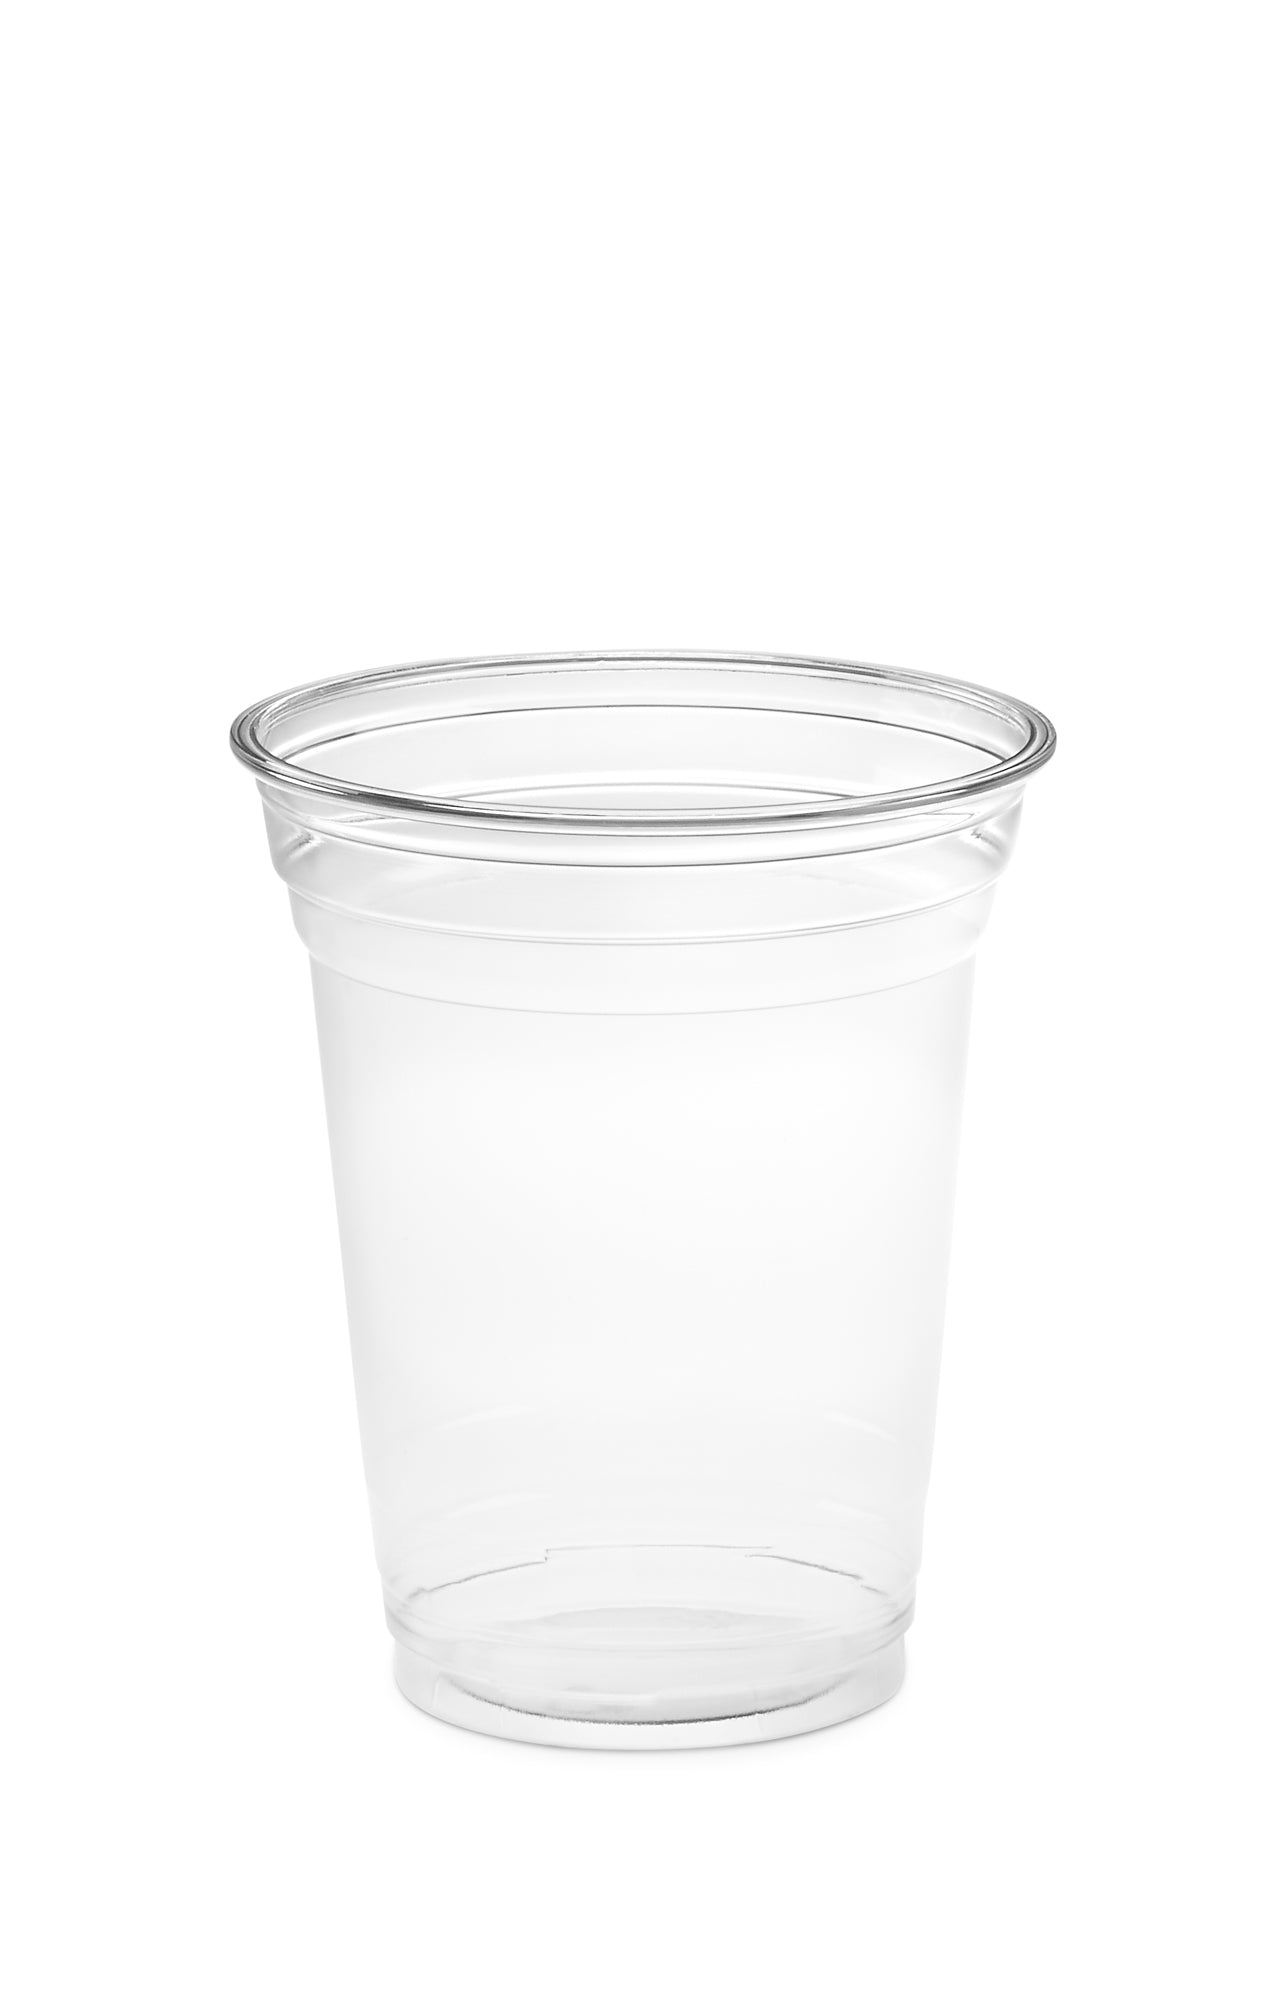 Crystal Tall Plastic Cup With Cover , Large Disposable Cups For